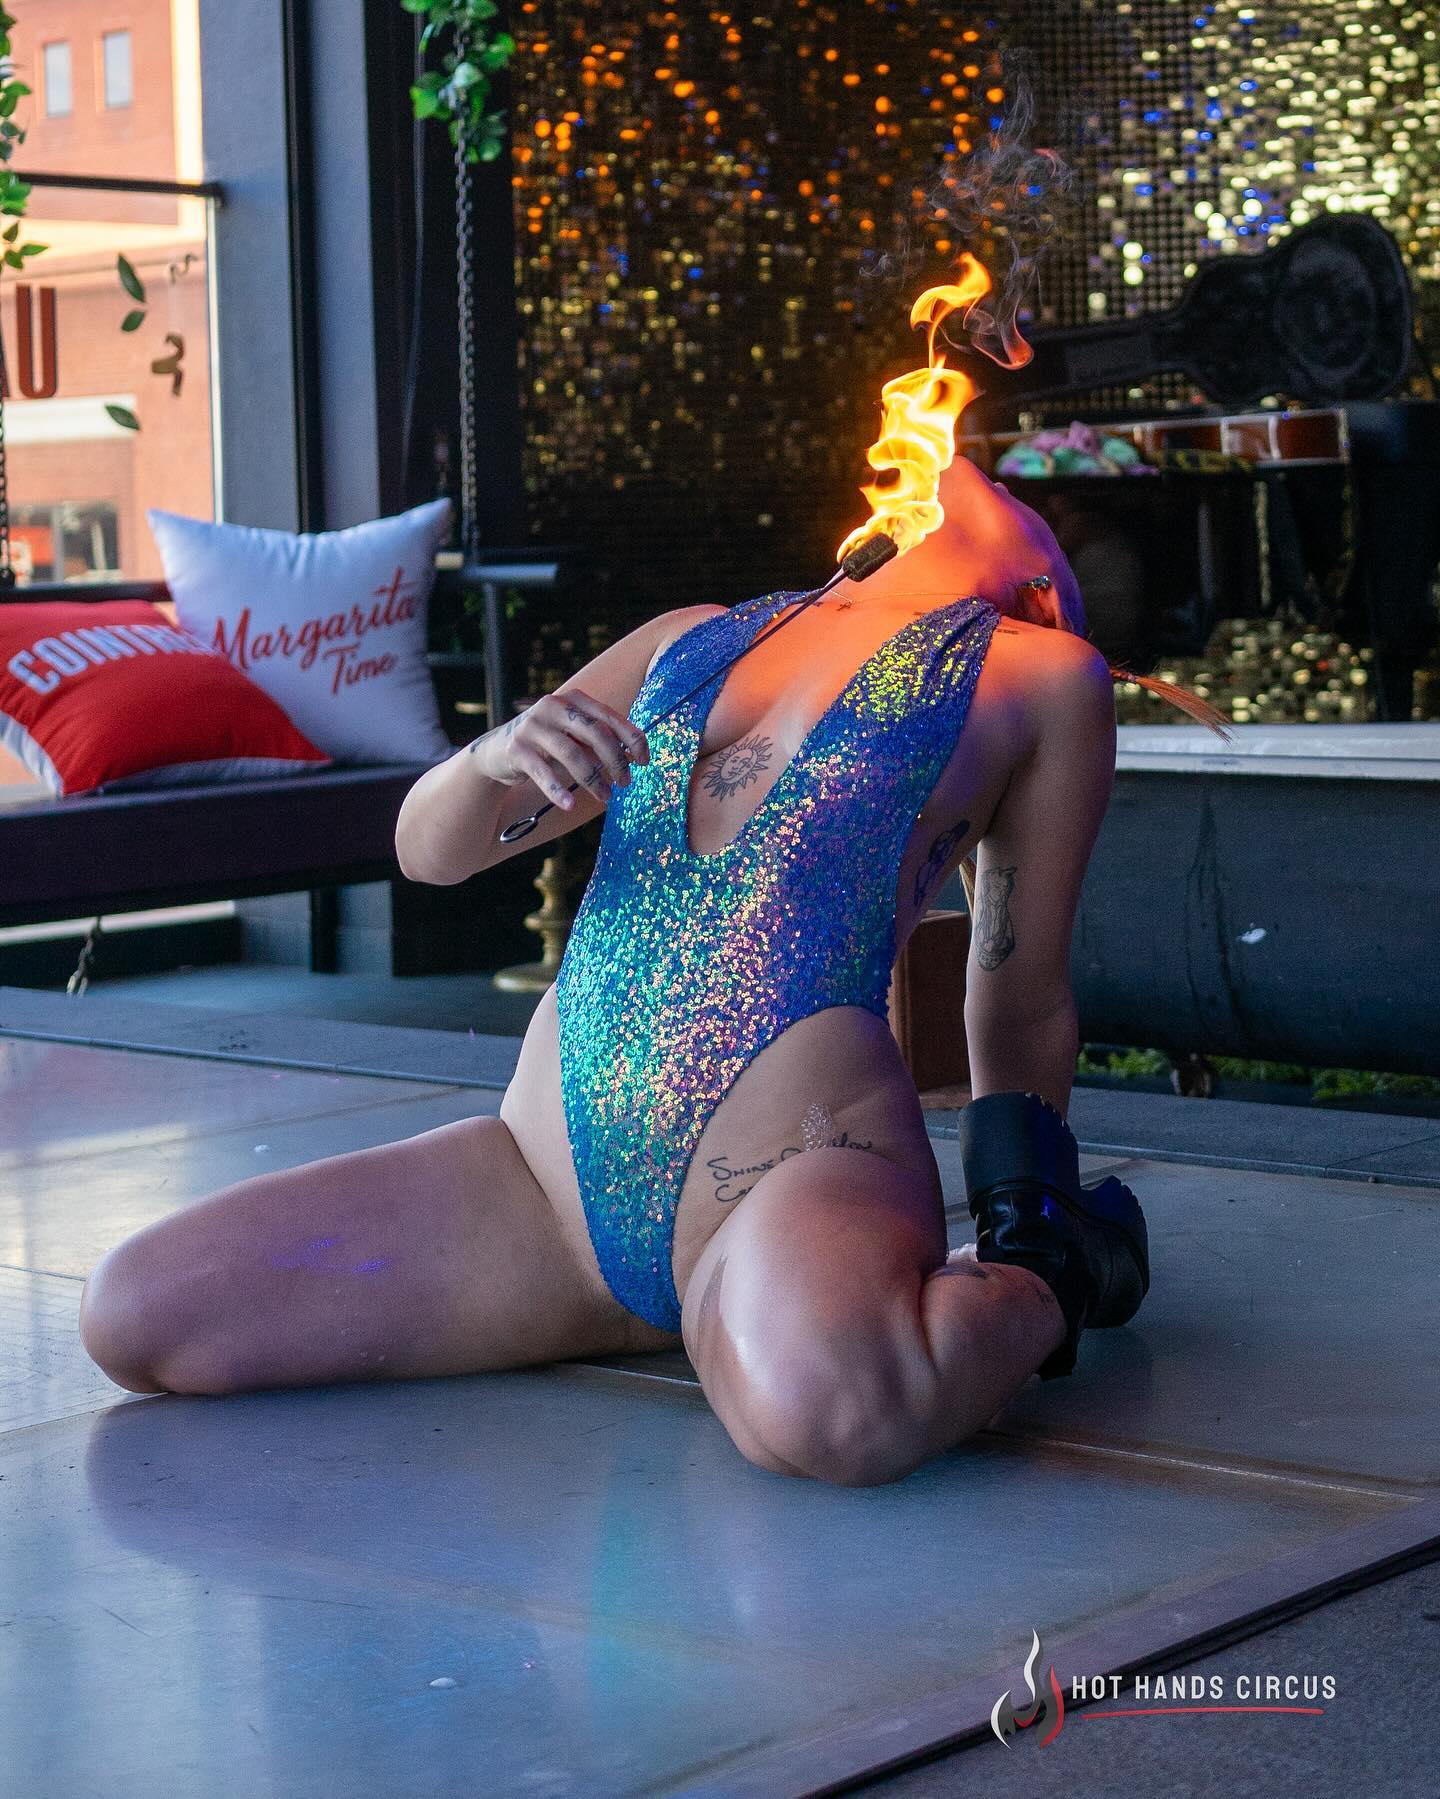 Light me like a match, watch me burn 🔥 

Performing for “Booty-full” @hot_hands_circus for The Fringe earlier this year 🤙🏼✨
📸 @imagesbymadelaine 

#burlesque #fireeating #firefleshing #performer #adelaideperformer